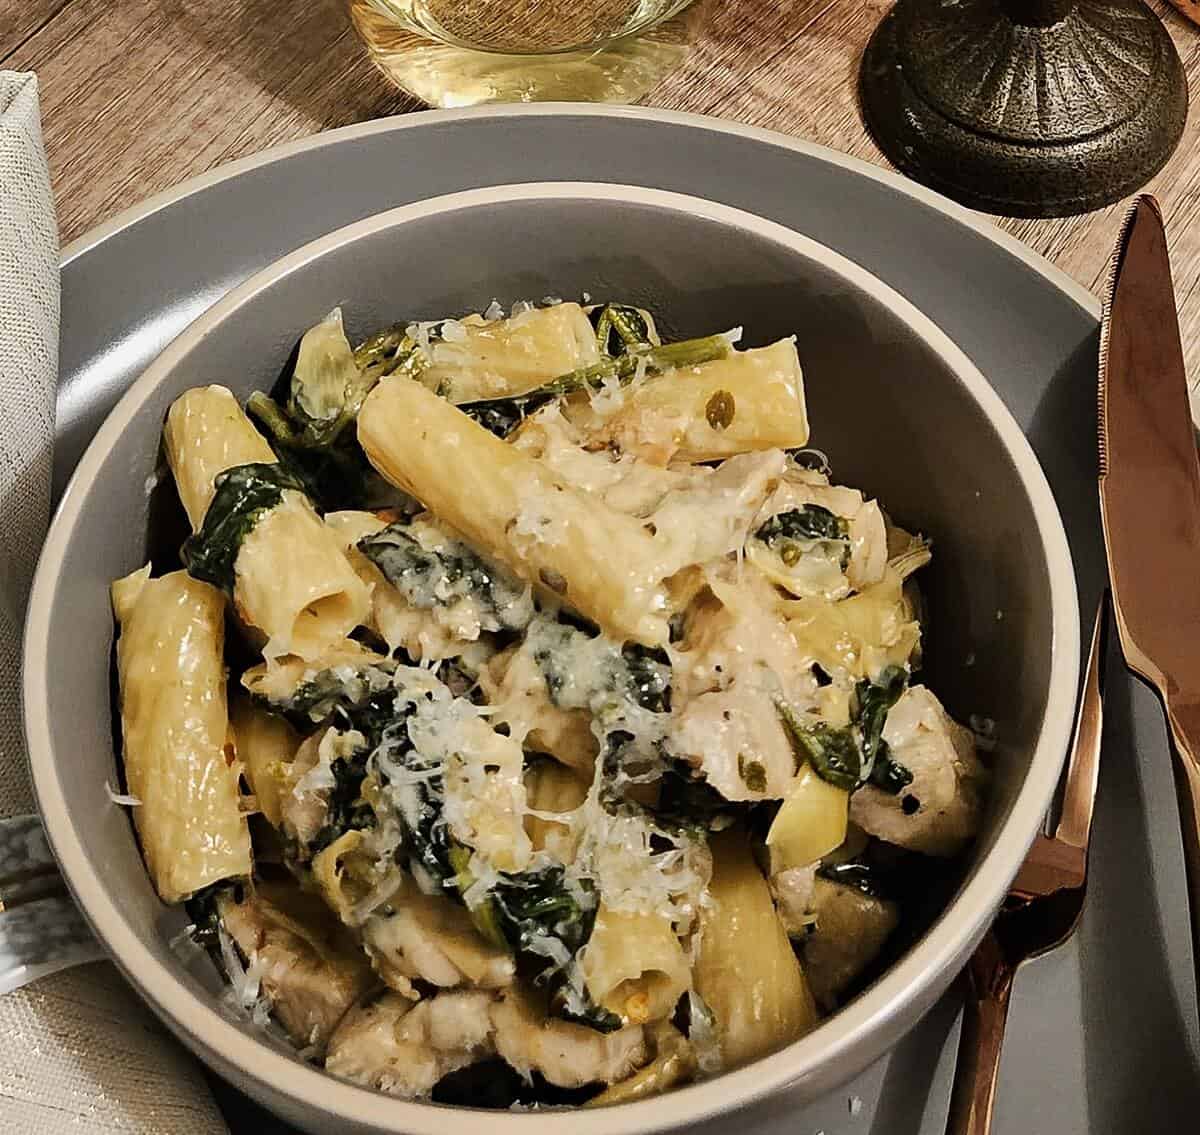 finished chicken, spinach and artichoke rigatoni pasta in a bowl, with grated asiago cheese on top.